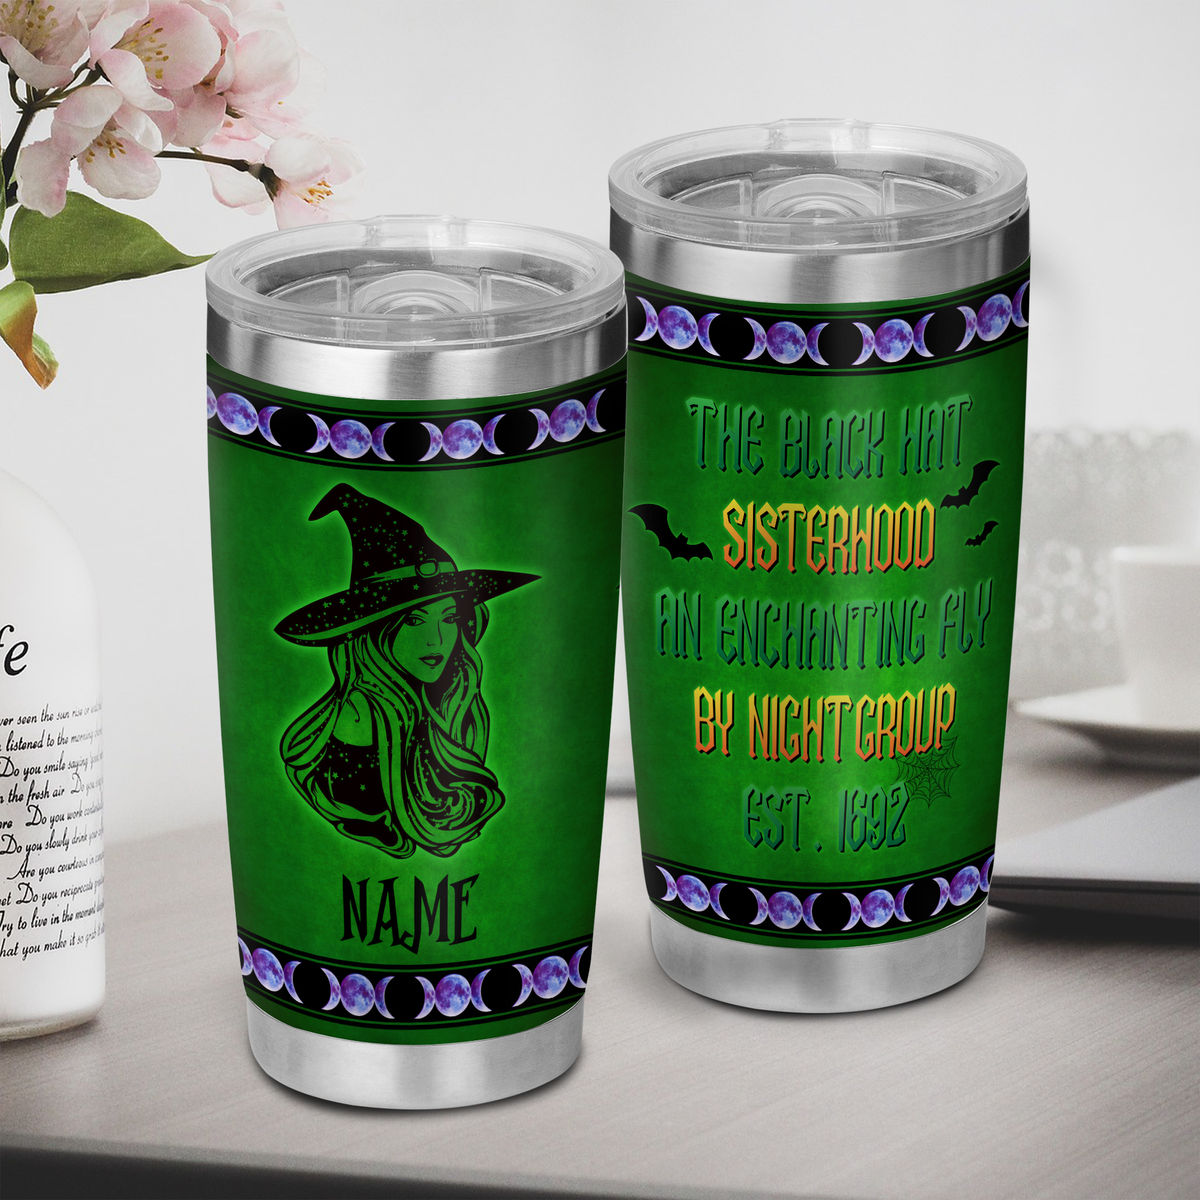 BE A WITCH - Halloween Witches 20oz skinny tumbler New custom made Stainless steel coffee cup mug 37059 37063 - Personalized Tumbler_2